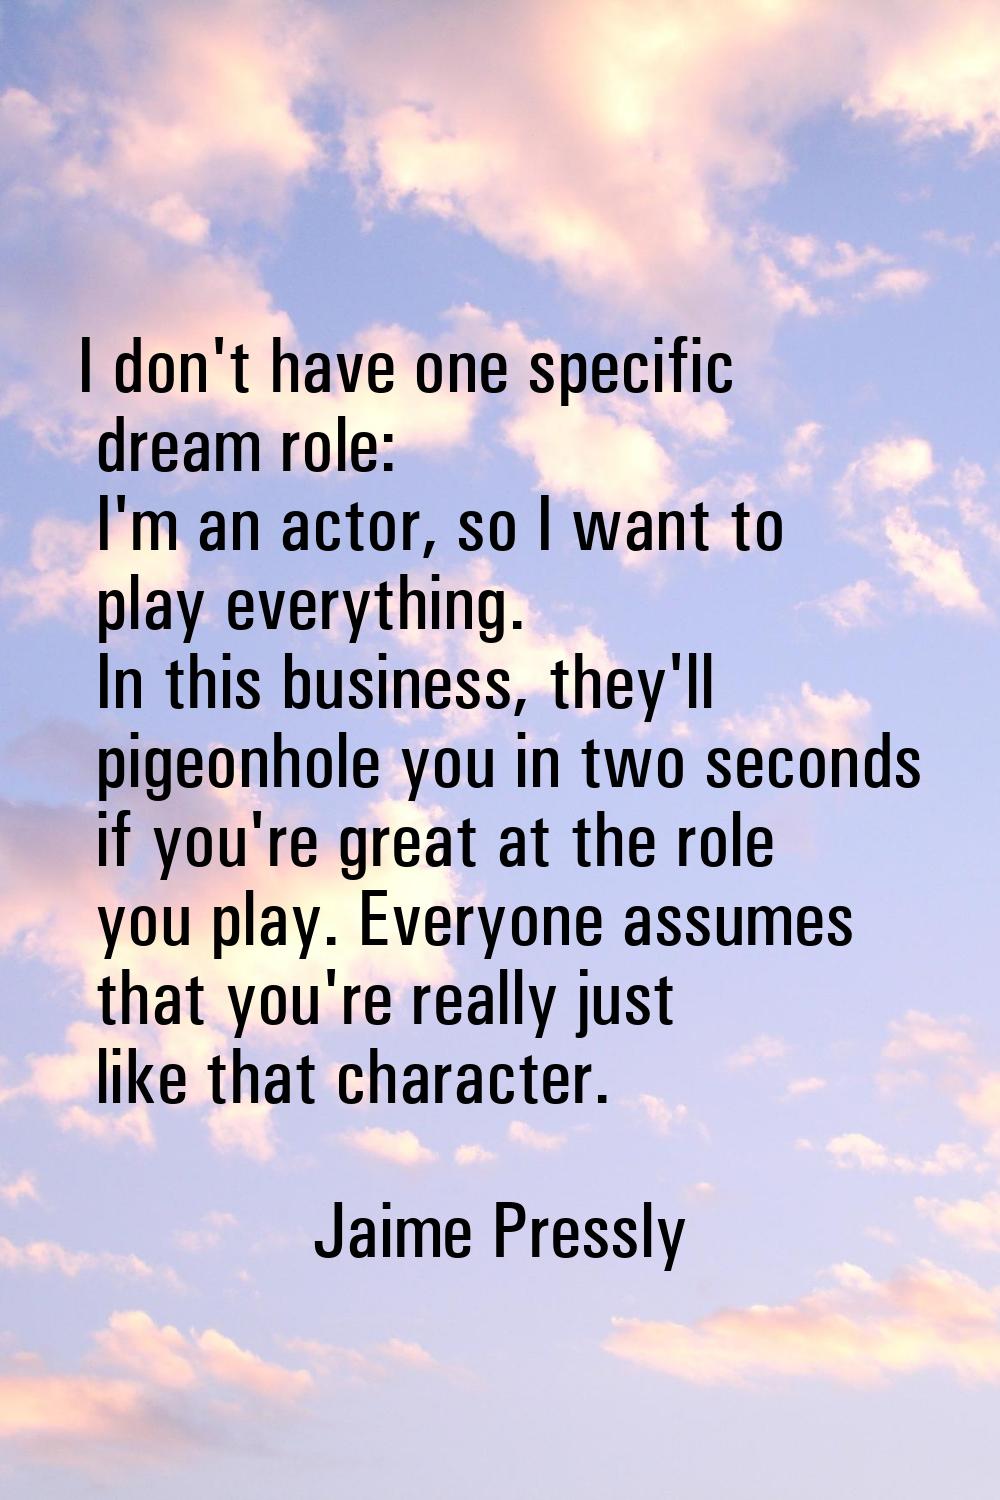 I don't have one specific dream role: I'm an actor, so I want to play everything. In this business,